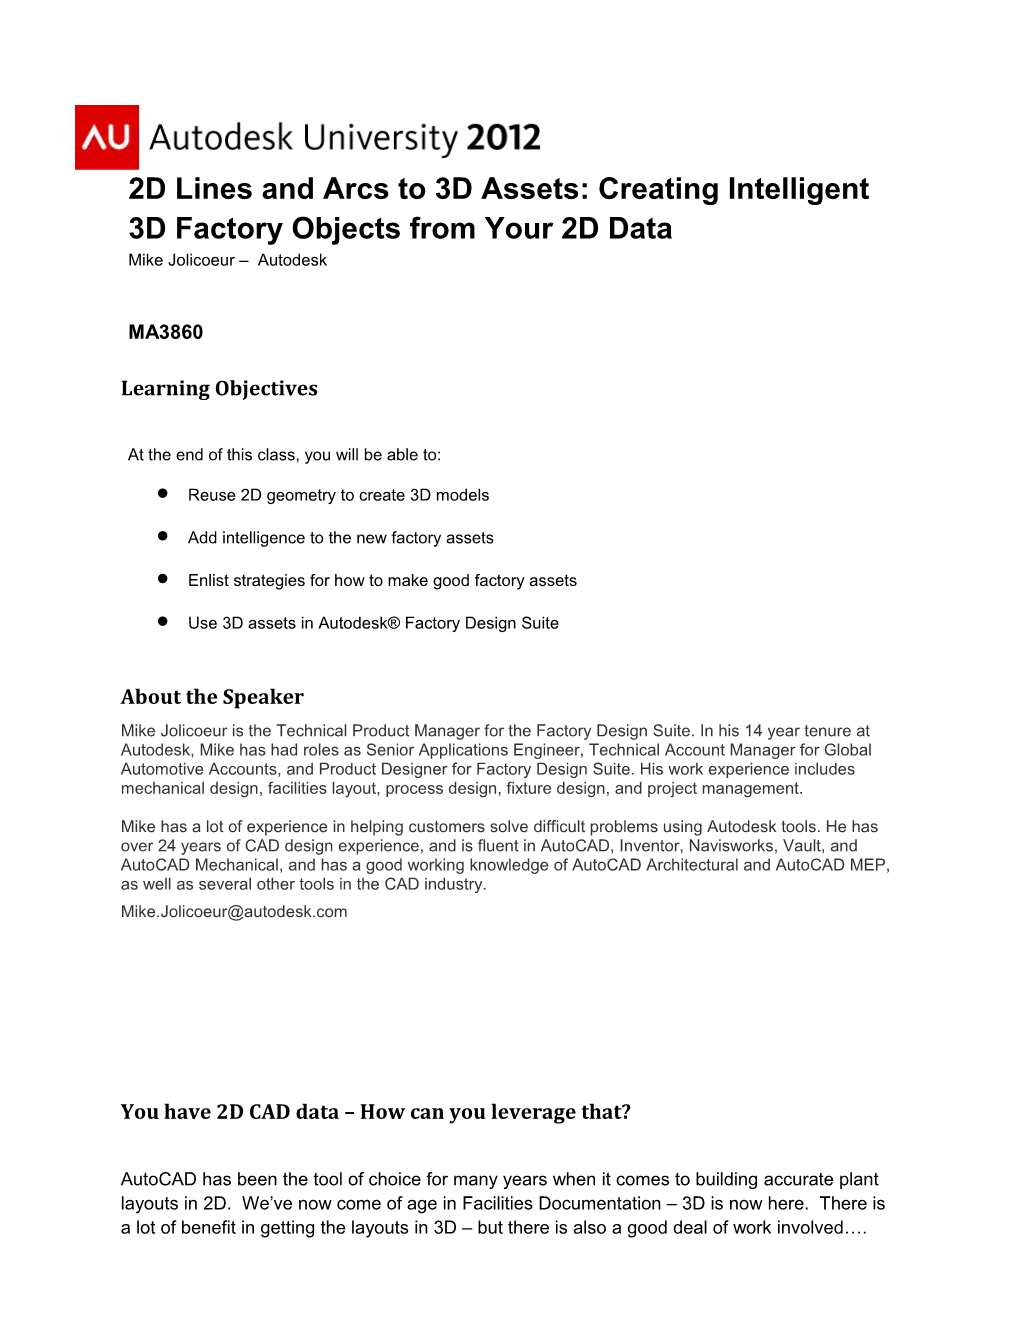 2D Lines and Arcs to 3D Assets: Creating Intelligent 3D Objects from Your 2D Data